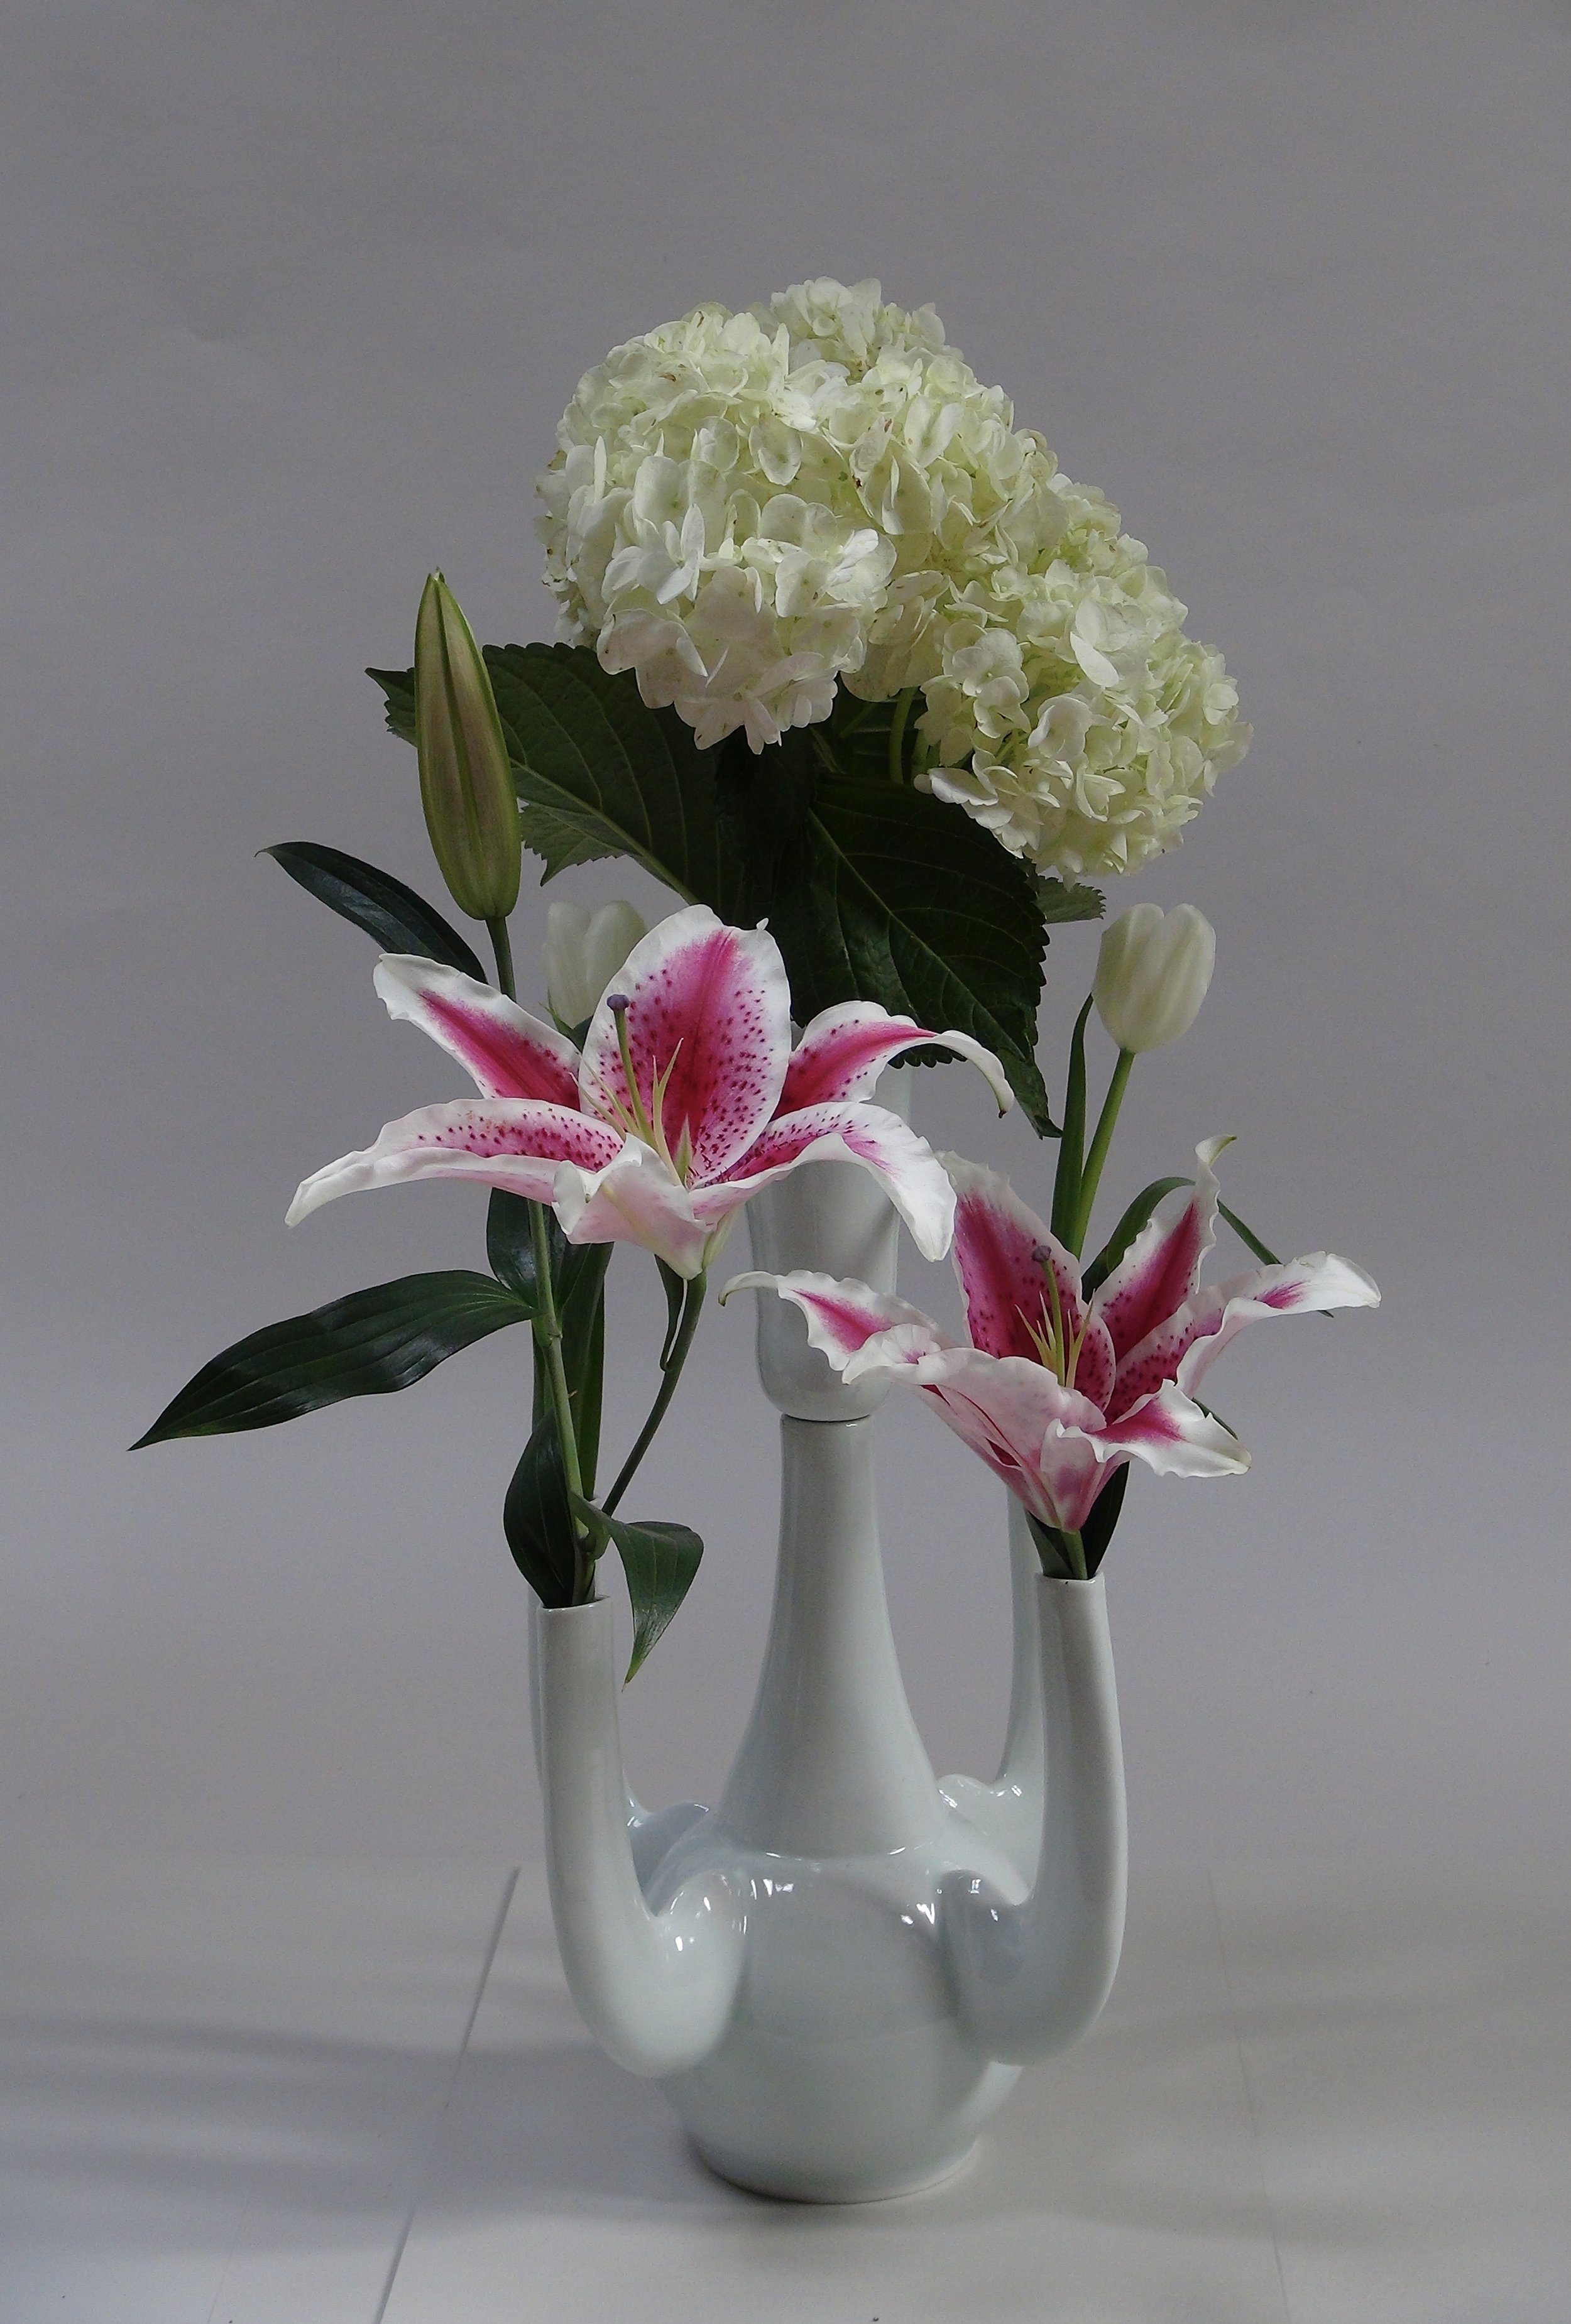  A structured flower vase makes it so easy to combine very different kinds of flowers. 